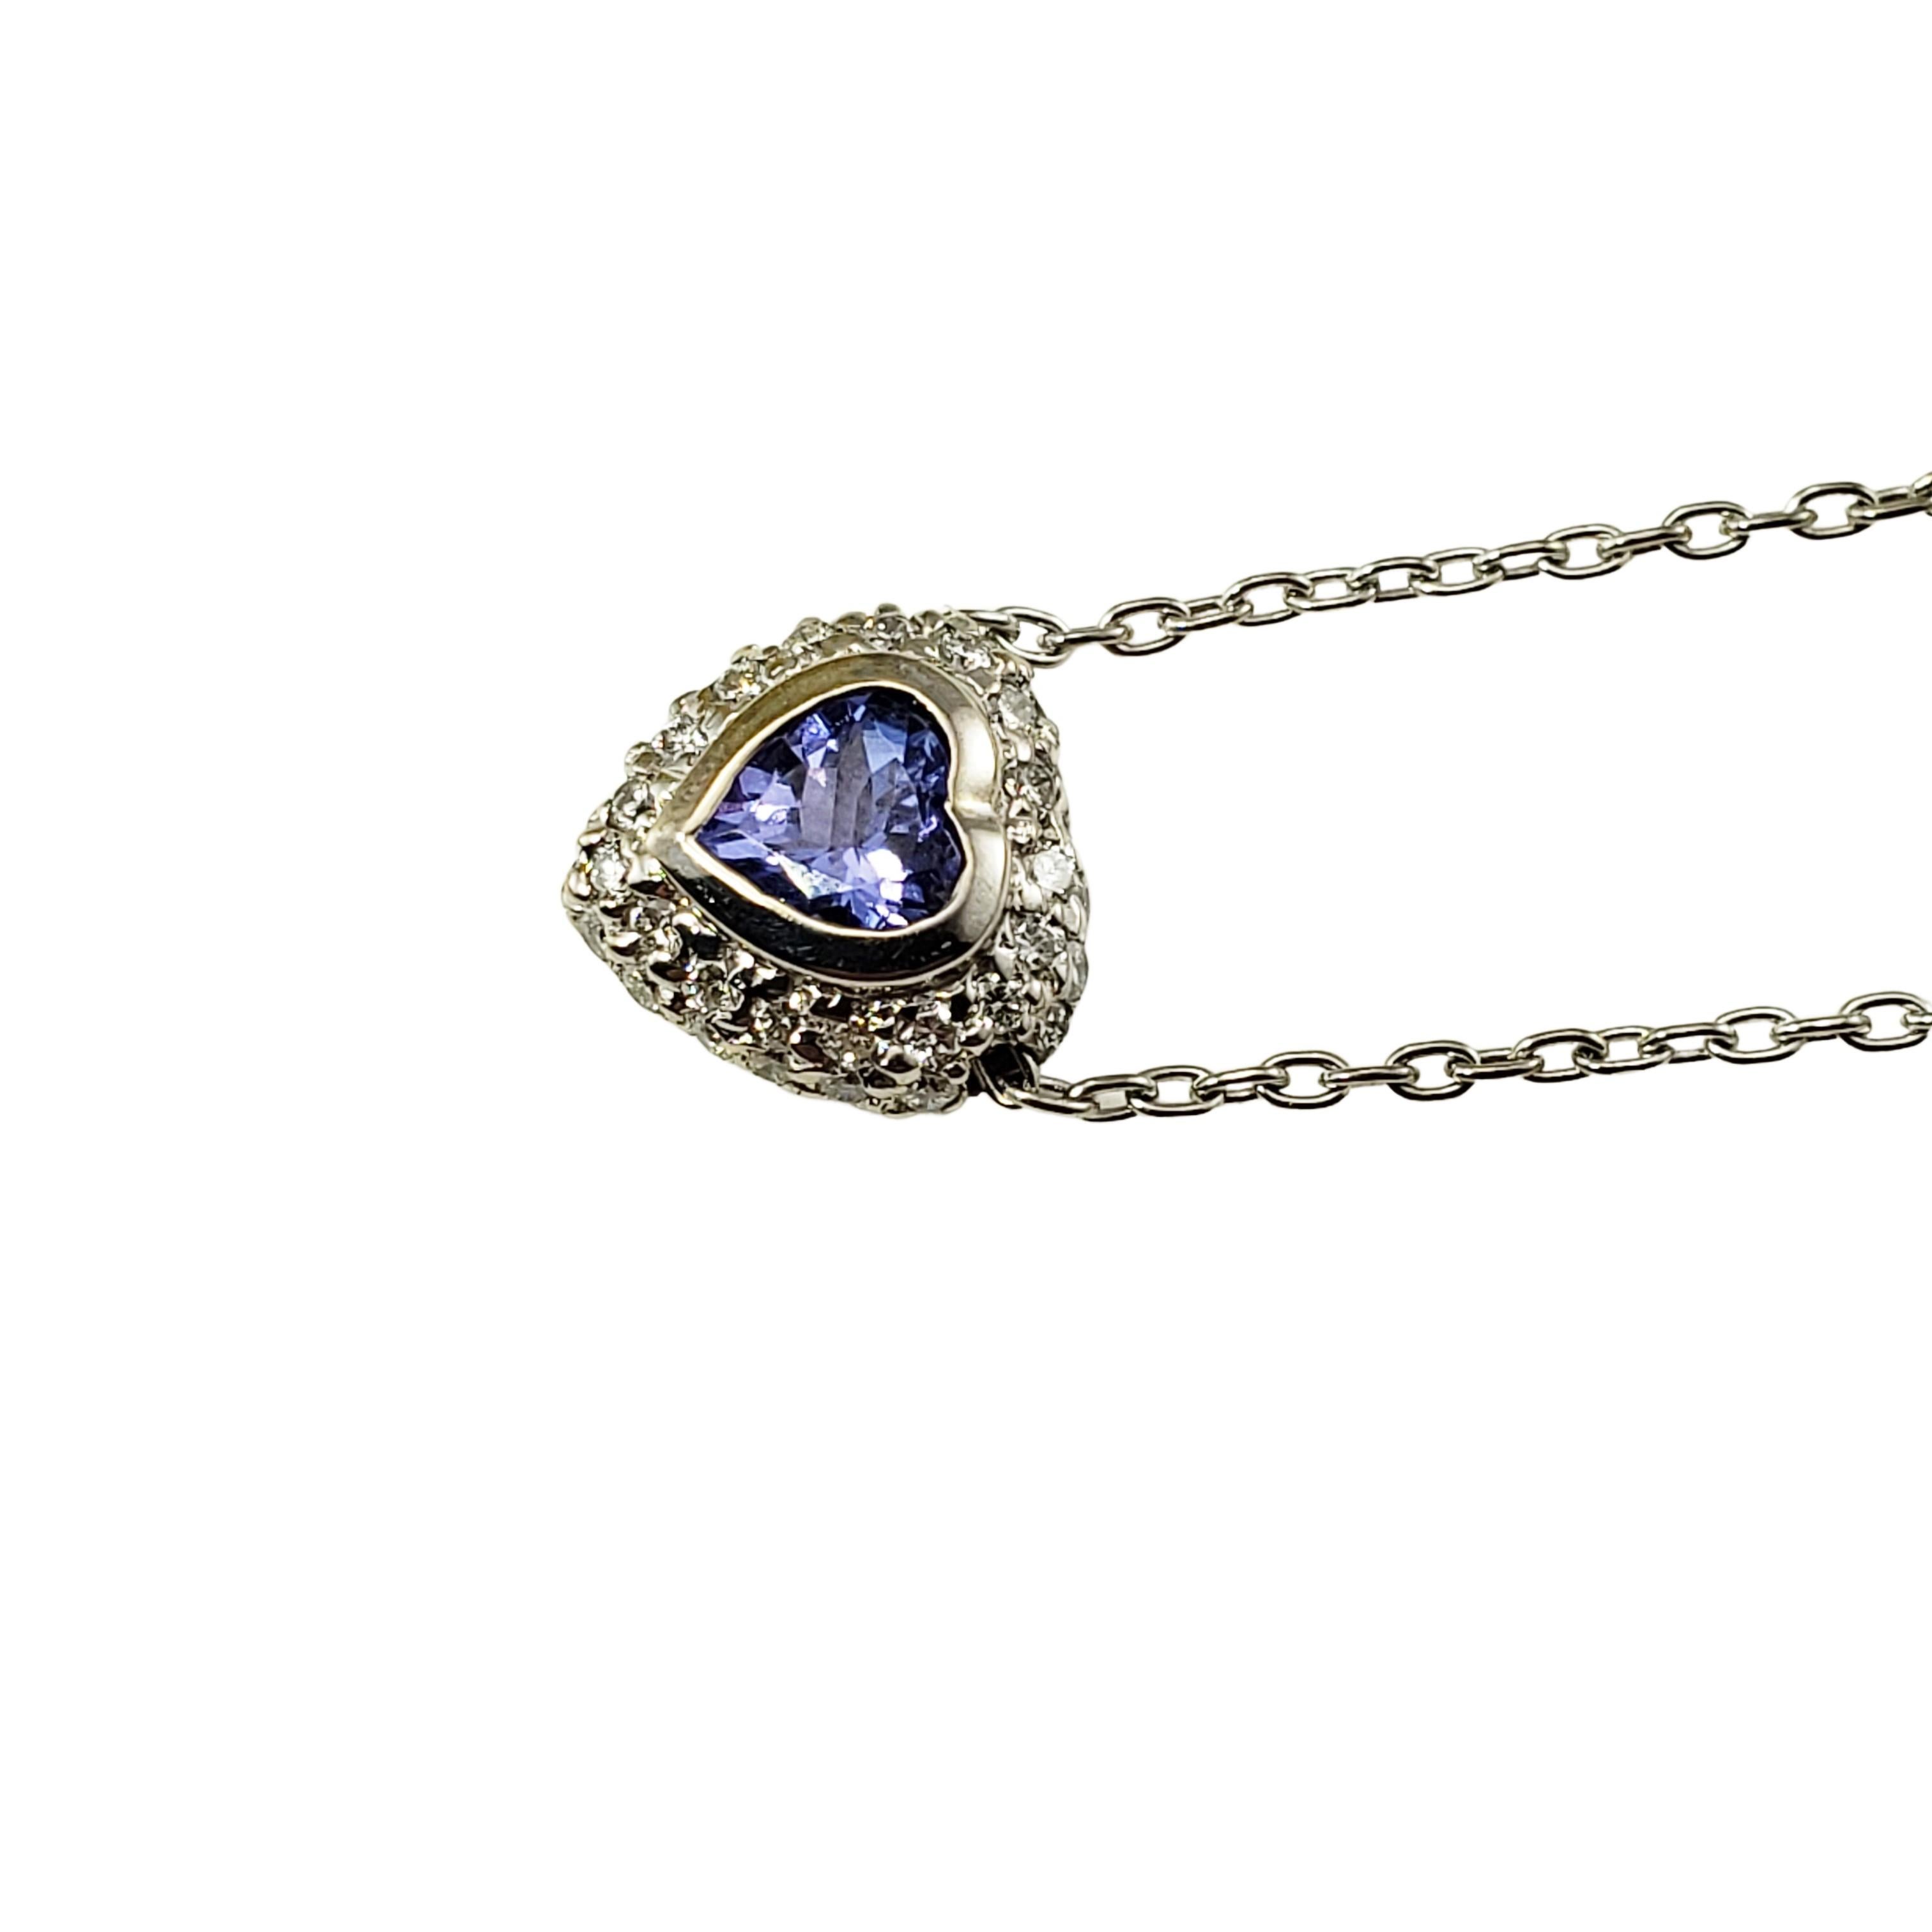 18 Karat White Gold Tanzanite and Diamond Heart Pendant Necklace-

This stunning heart pendant necklace features one tanzanite heart shaped gemstone (6 mm x 5 mm) surrounded by 36 round brilliant cut diamonds set in beautifully detailed 18K white